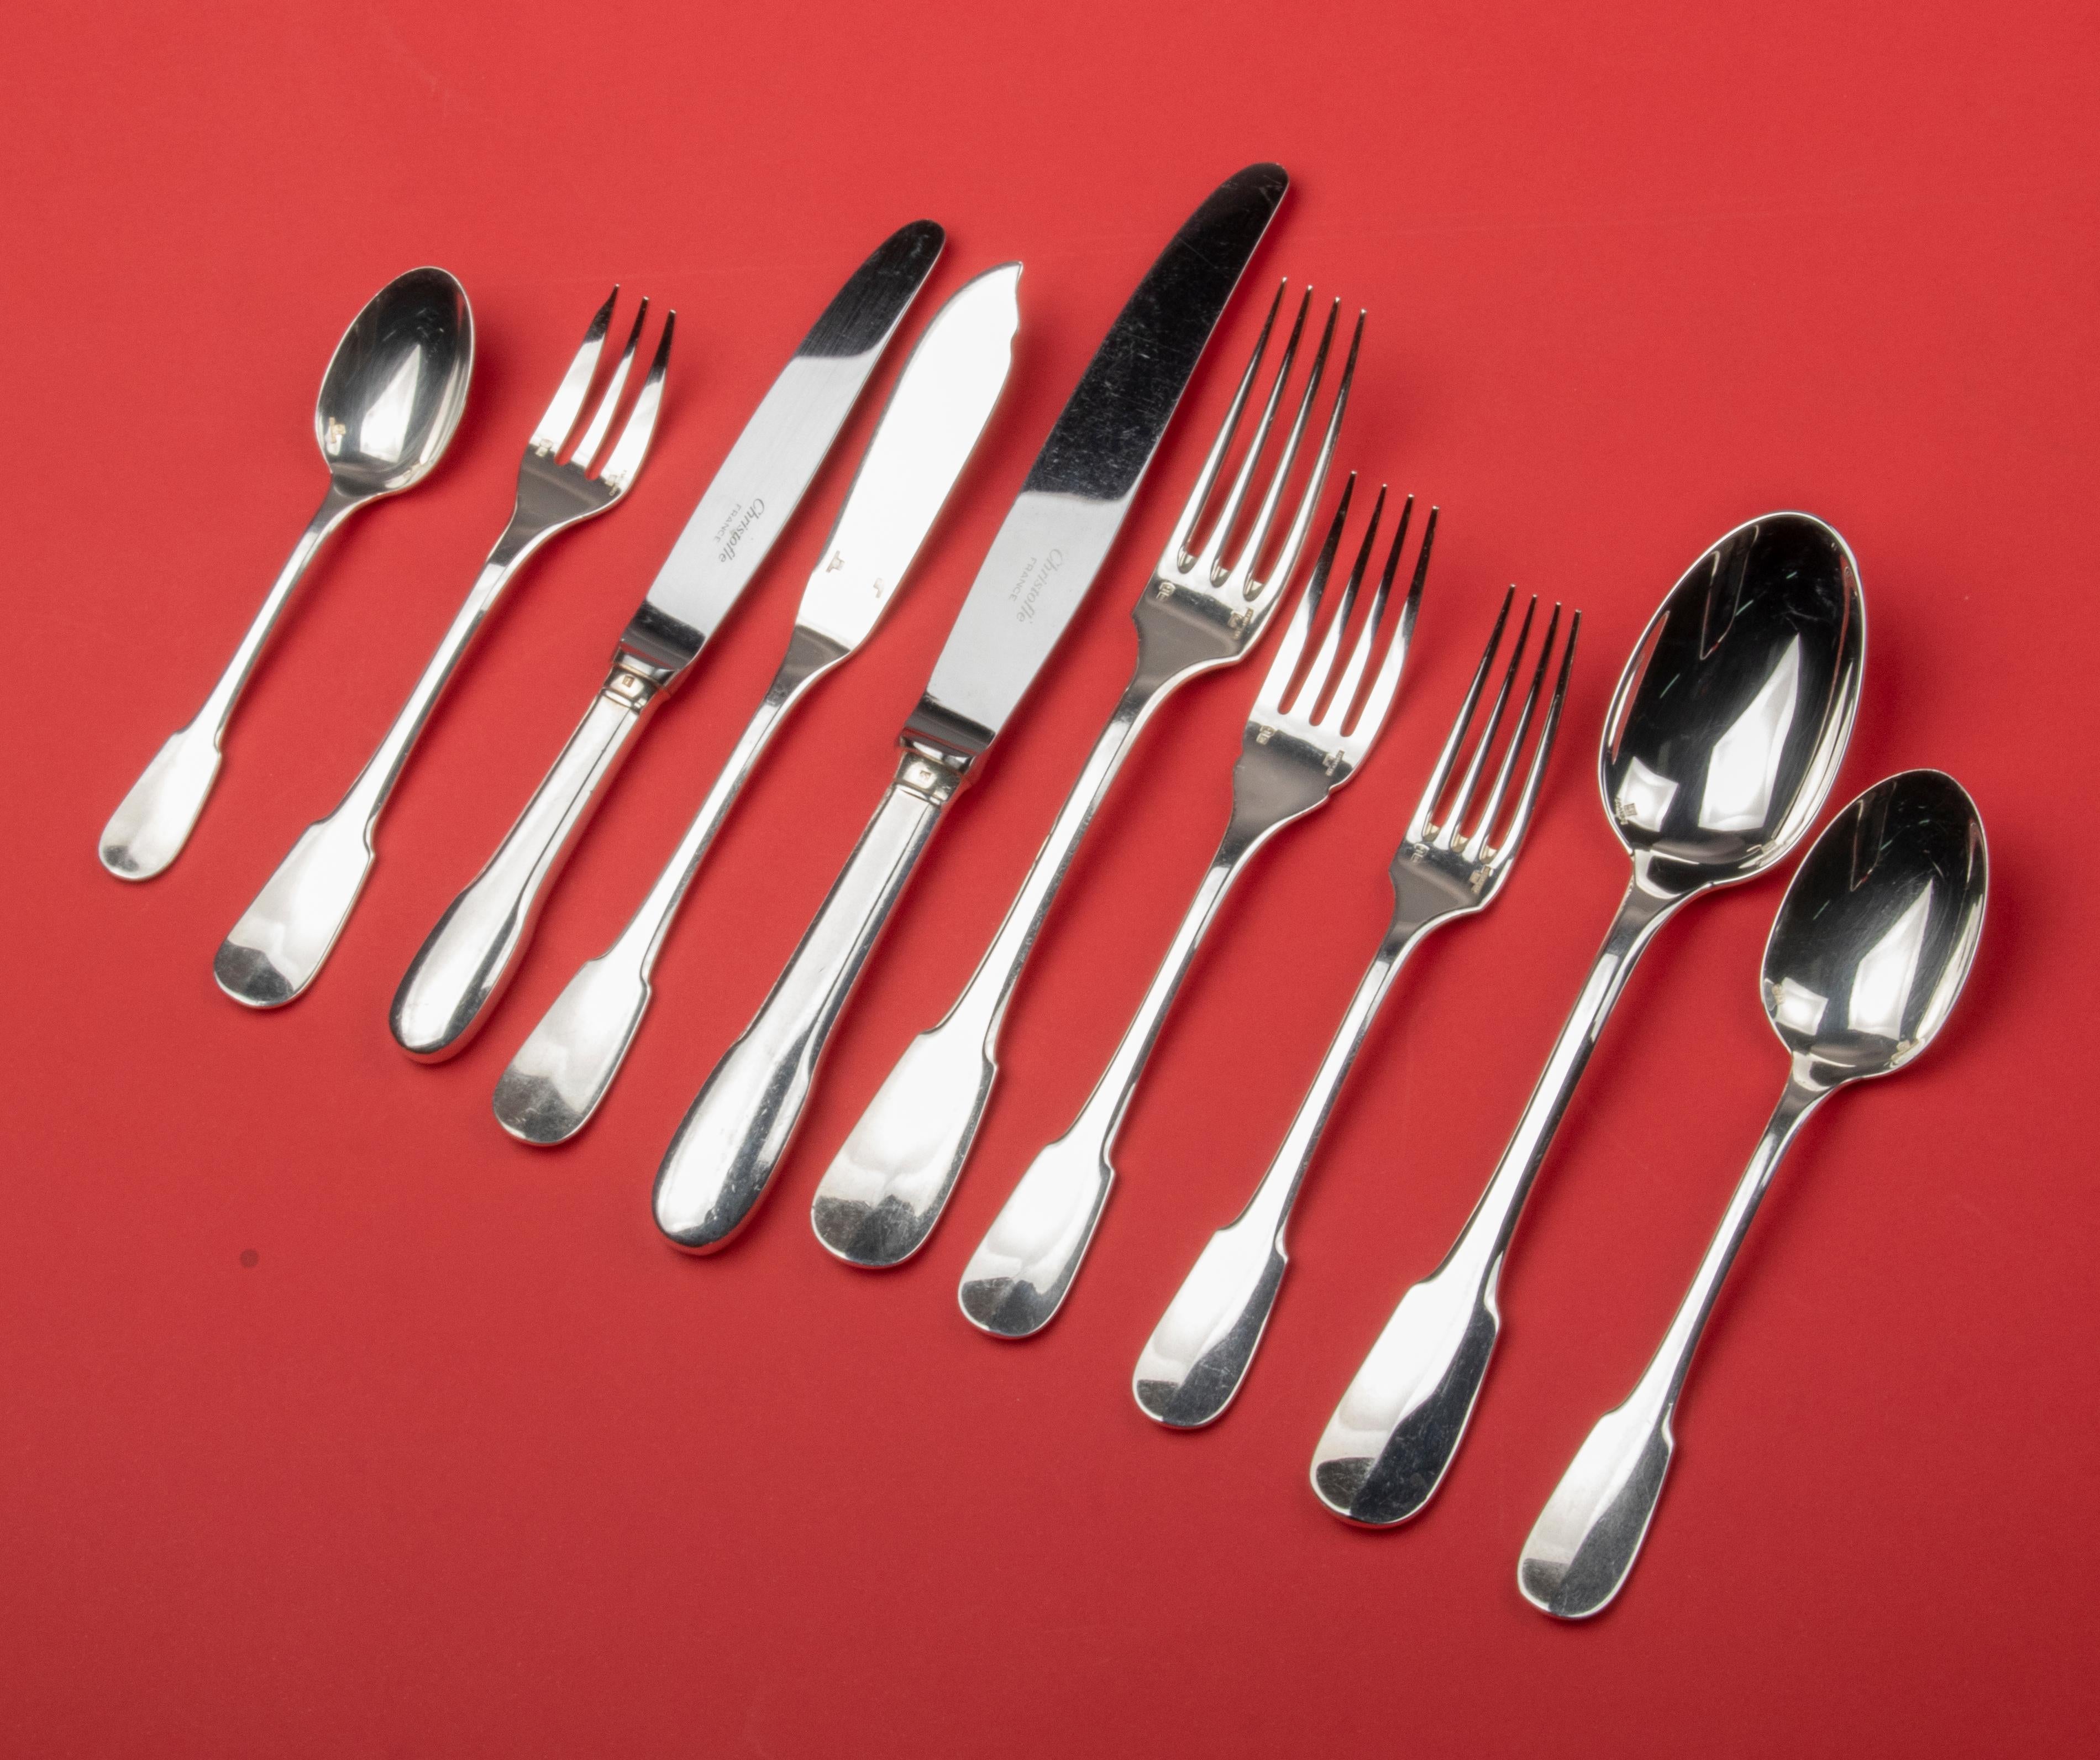 Late 20th Century 130-Piece Silver-Plated Flatware by Christofle, Cluny, for 12 Persons